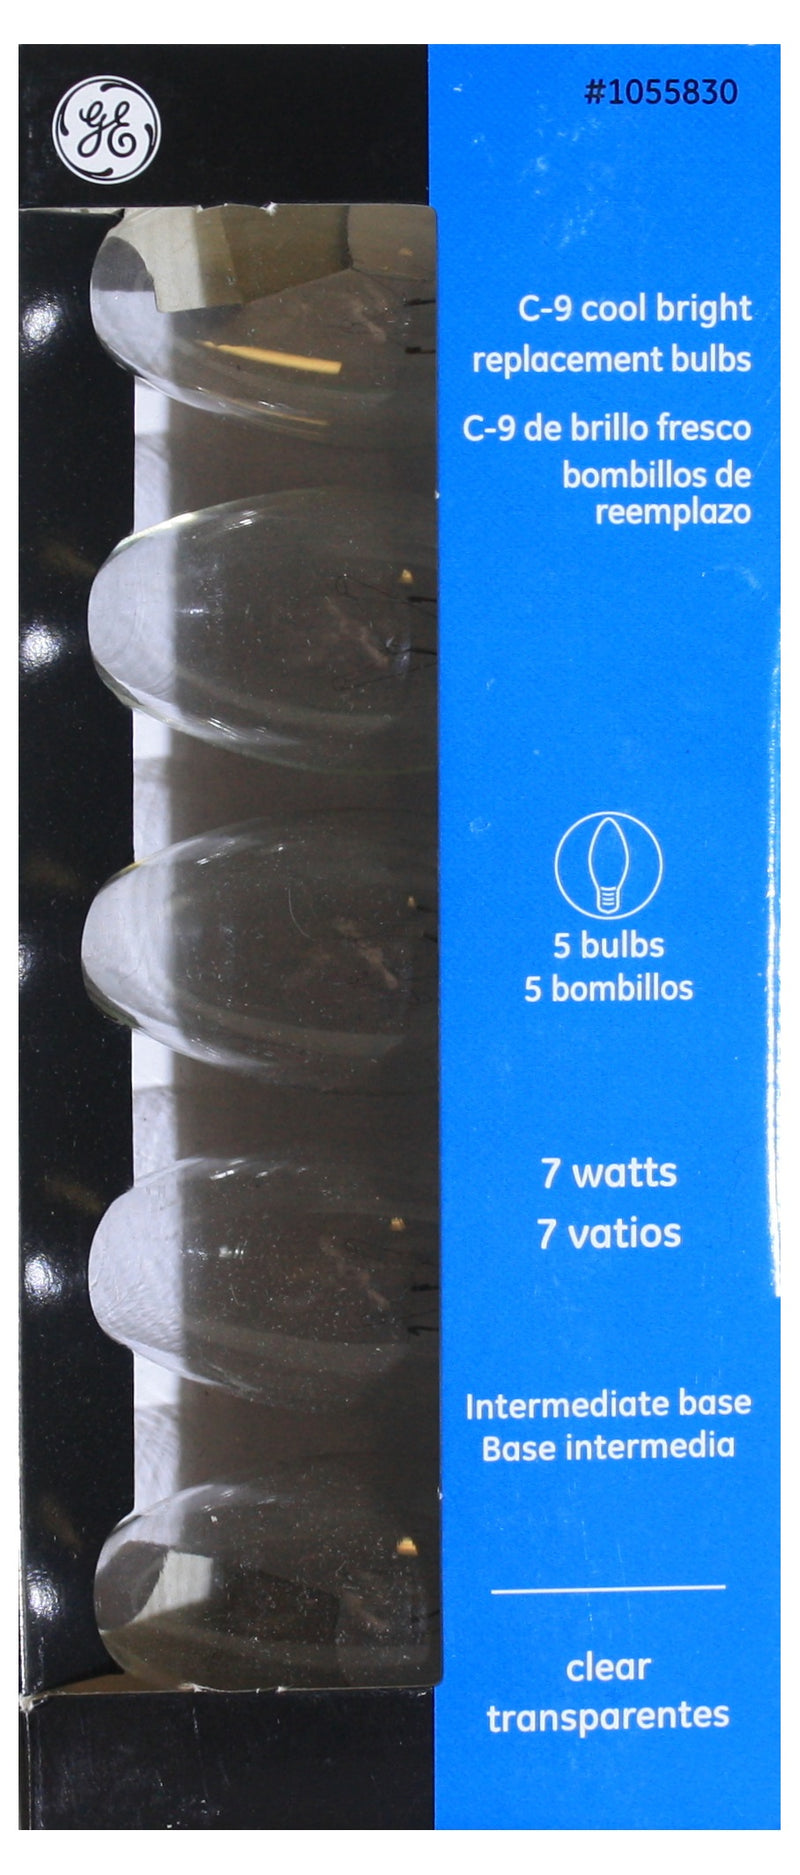 GE Incandescent C9 Replacement Bulb 5 Pack - The Country Christmas Loft